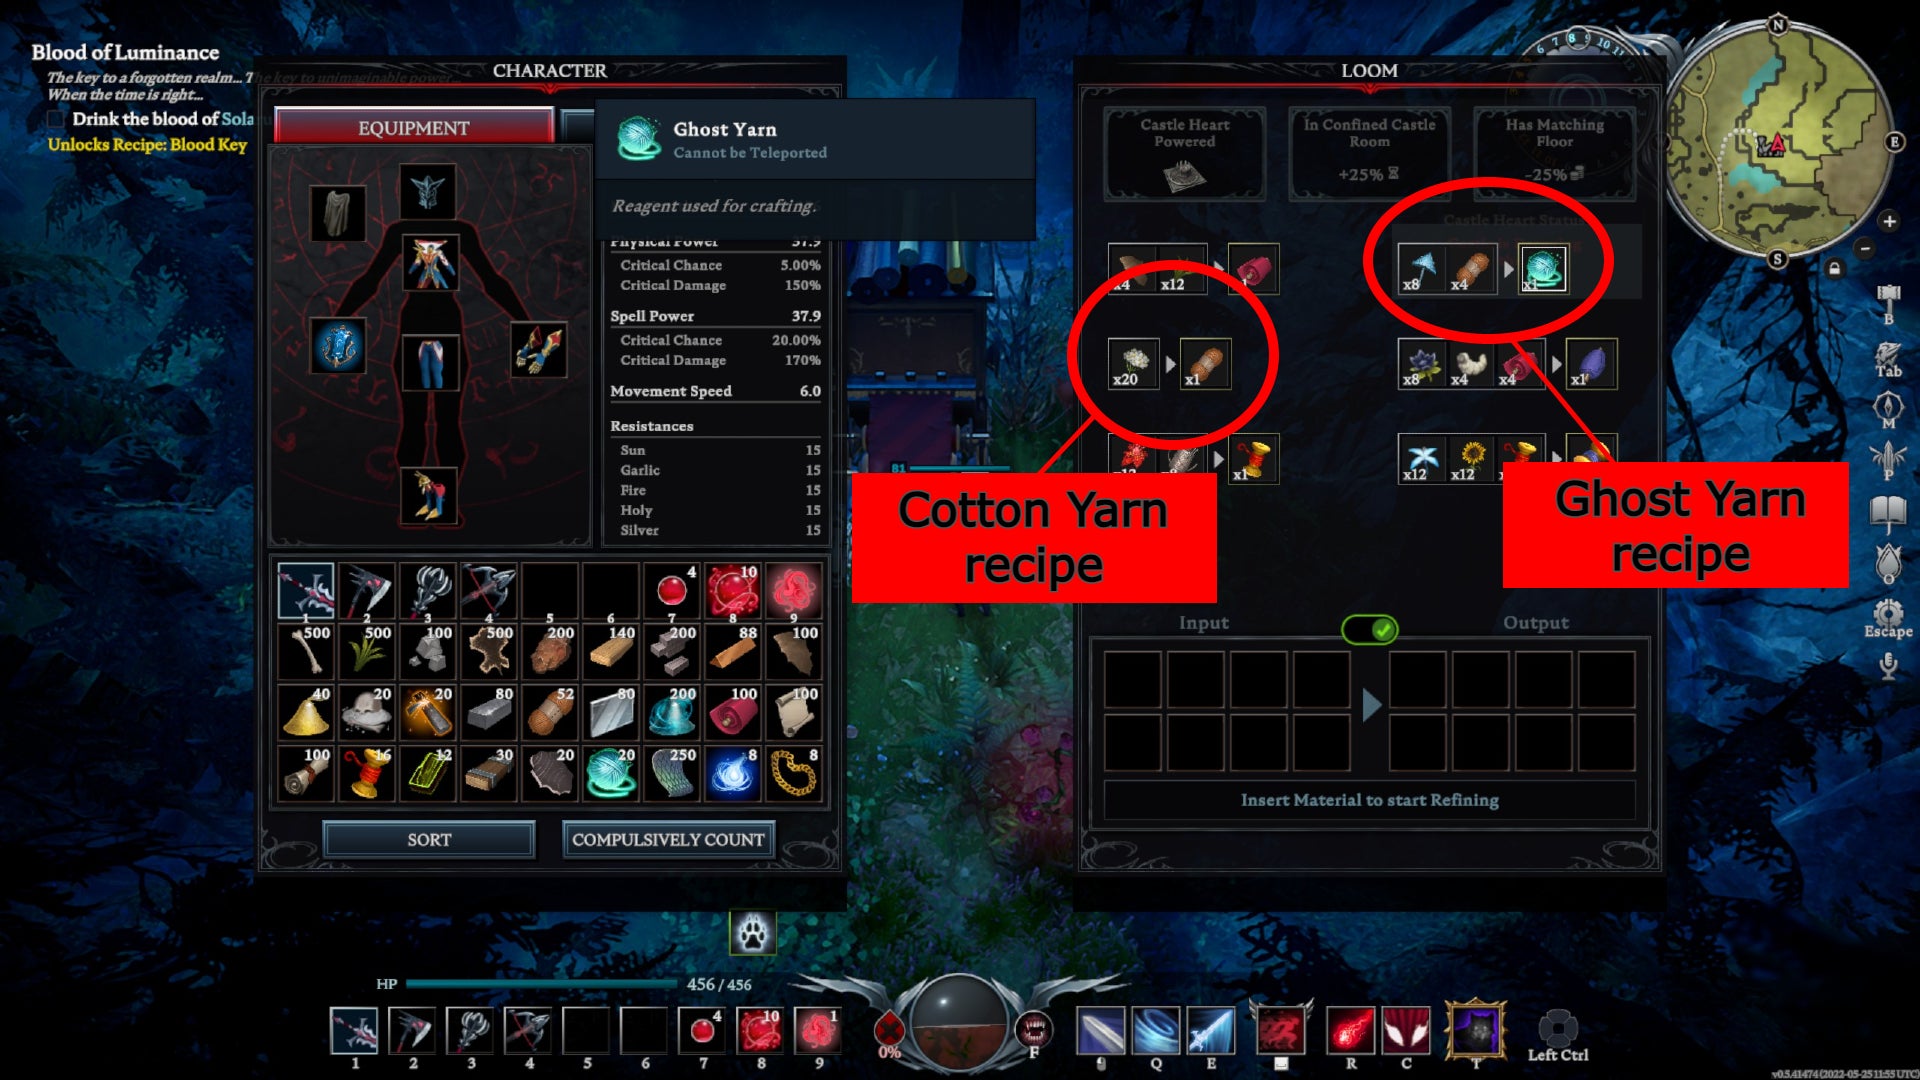 V Rising screenshot showing the Loom interface, with the Ghost Yarn and Cotton Yarn recipes circled in red.